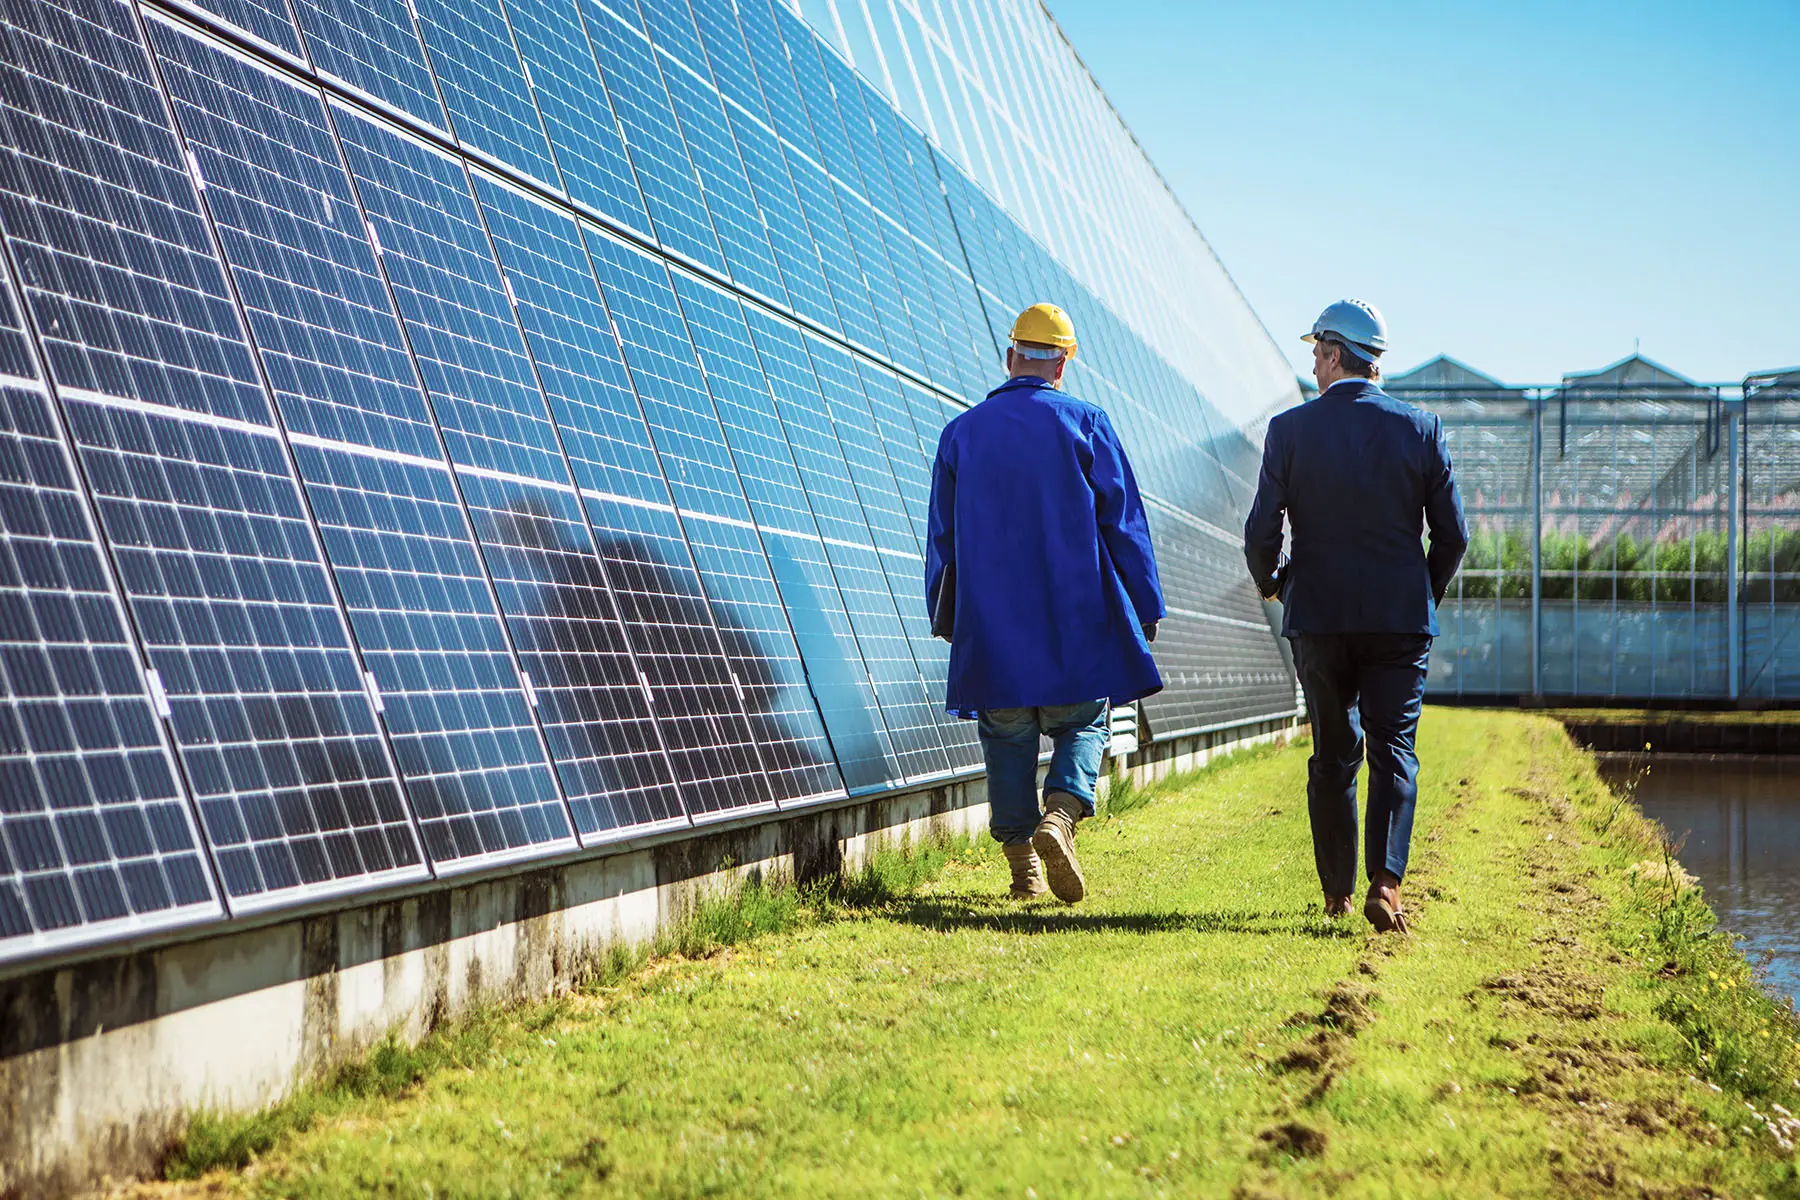 CEO walking with an engineer along a solar panel site.